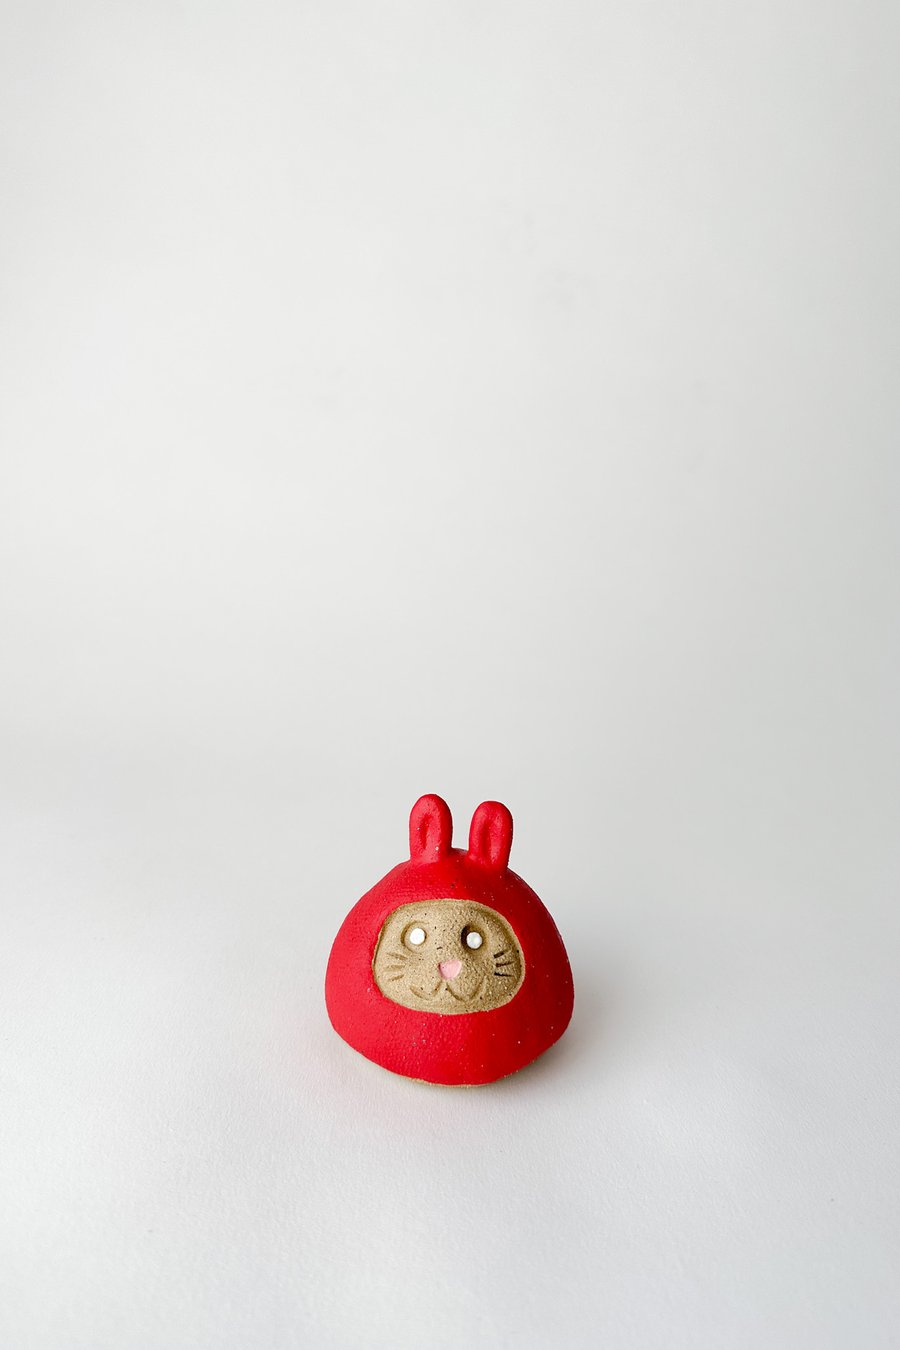 Image of Lunar New Year Bunny Daruma Wishing doll - Red Speckled Matte *ON SALE*